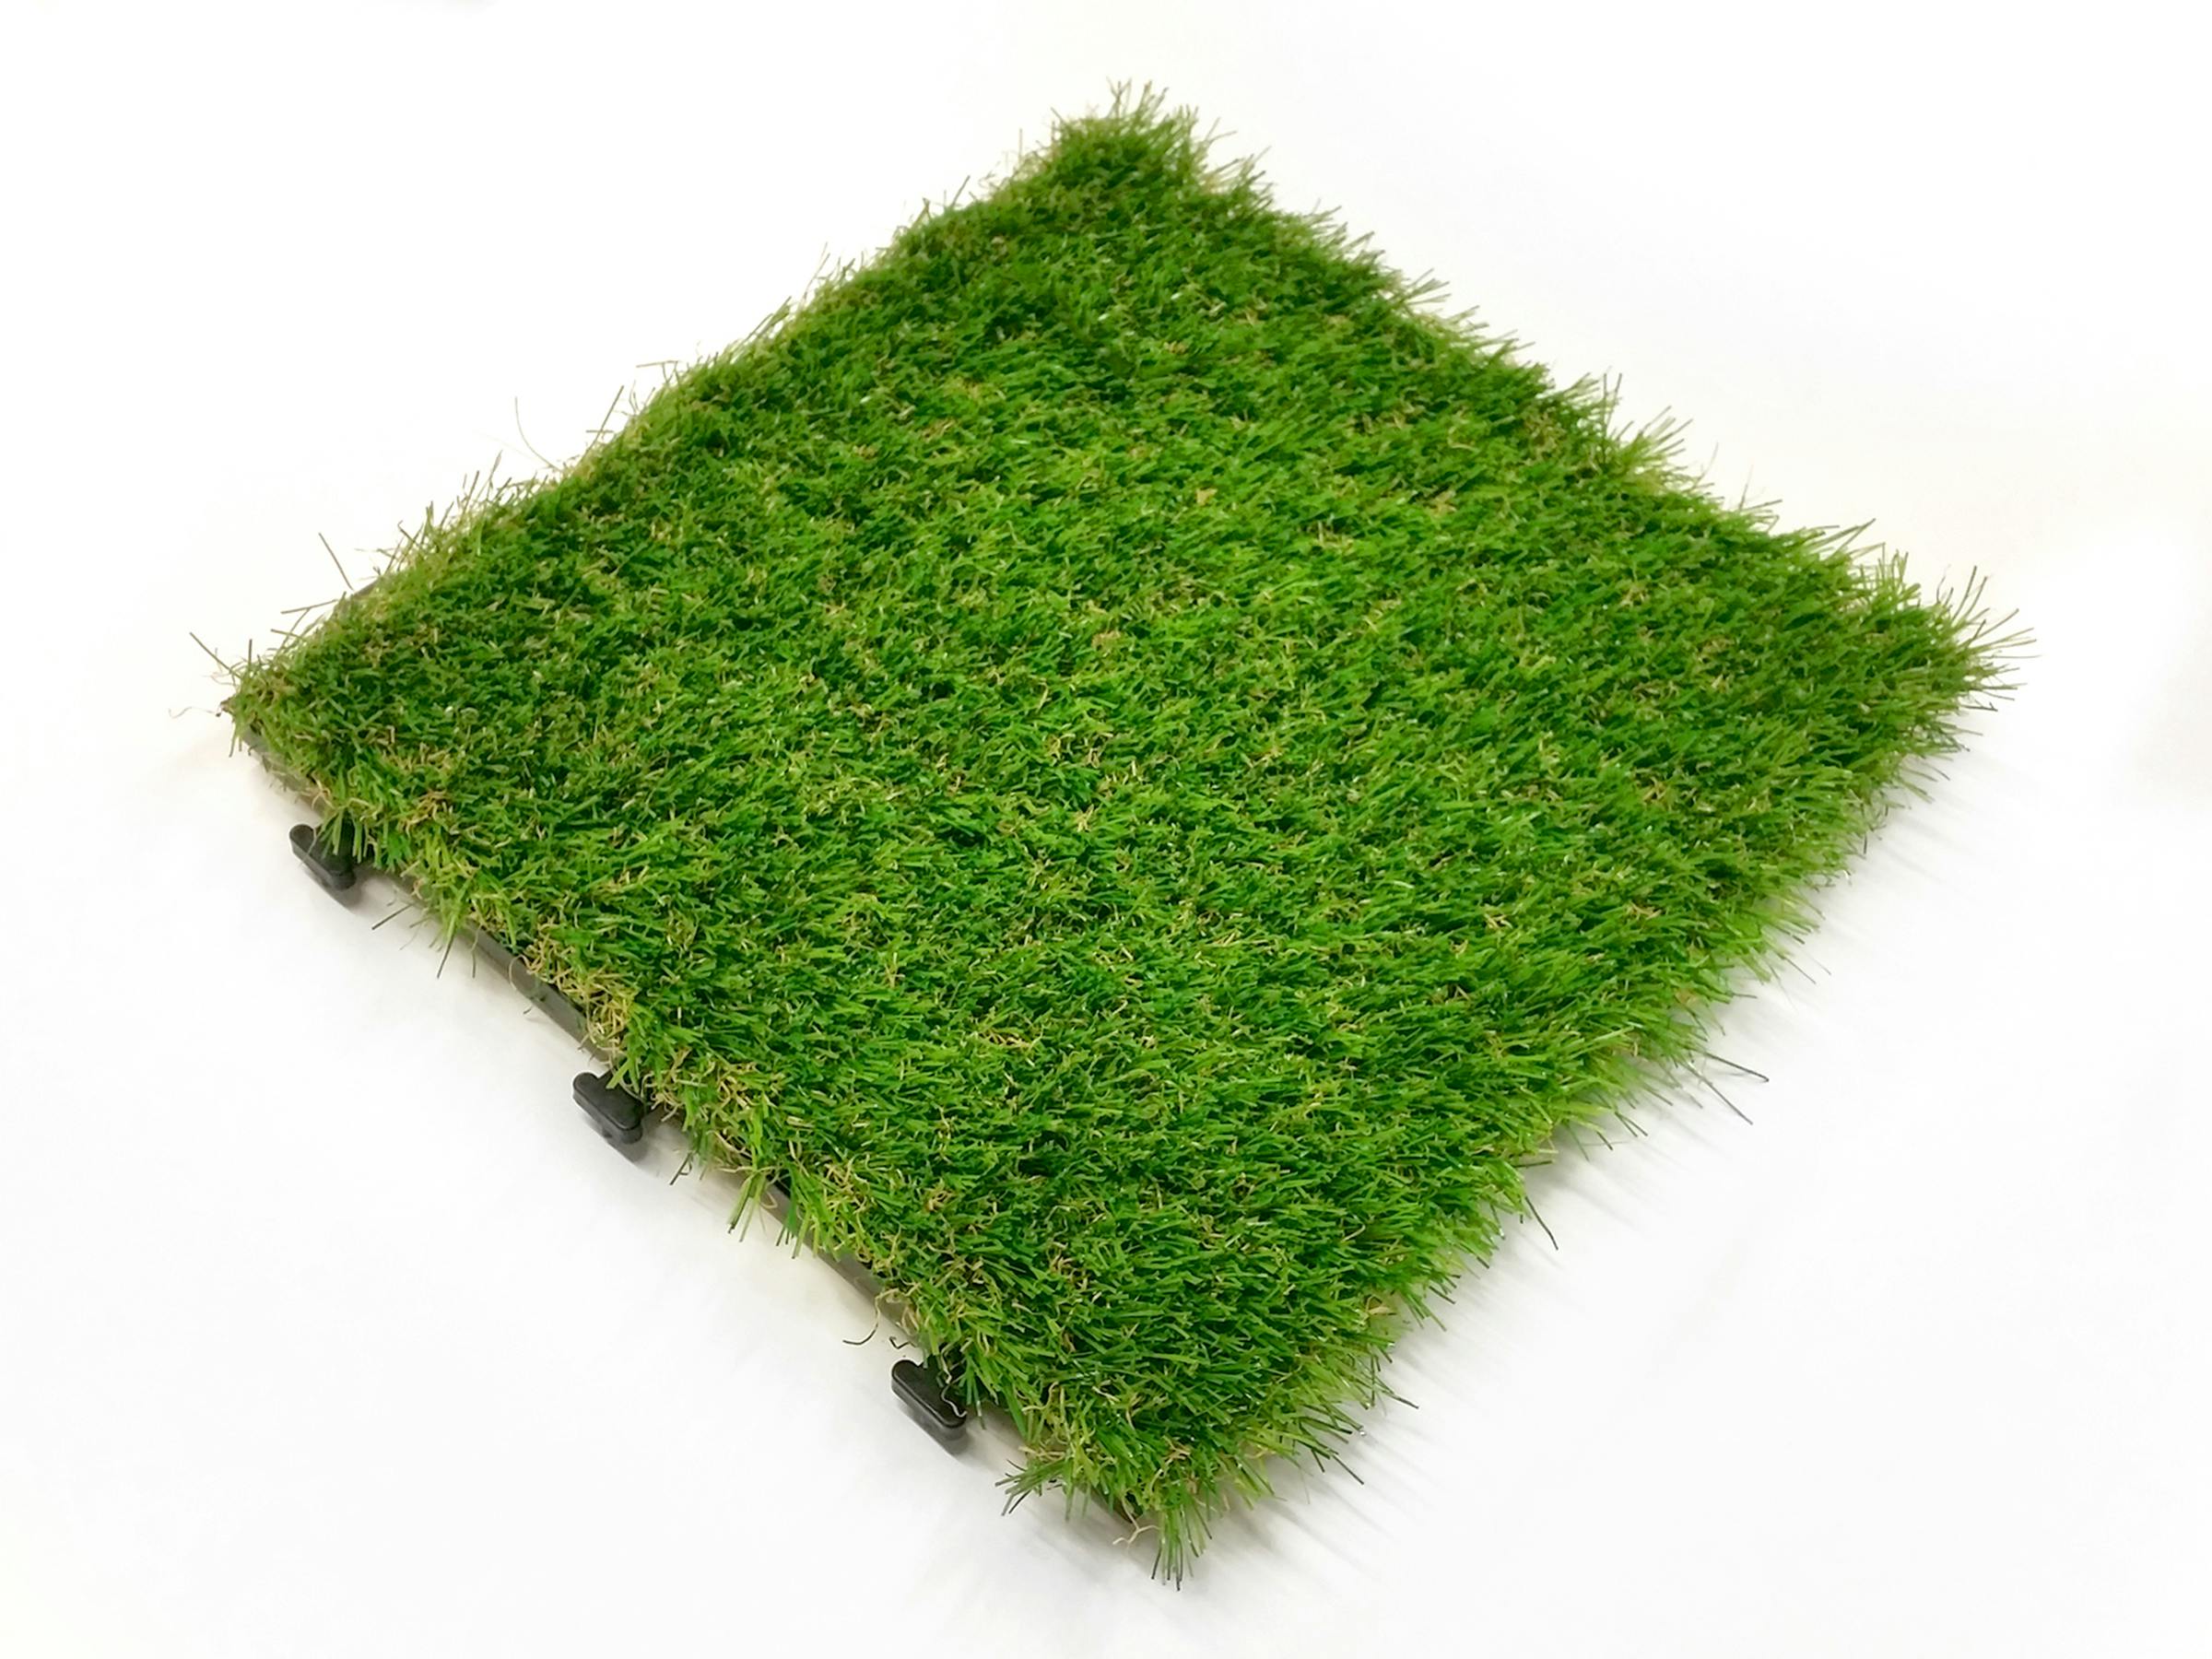 Synthetic Grass Auckland